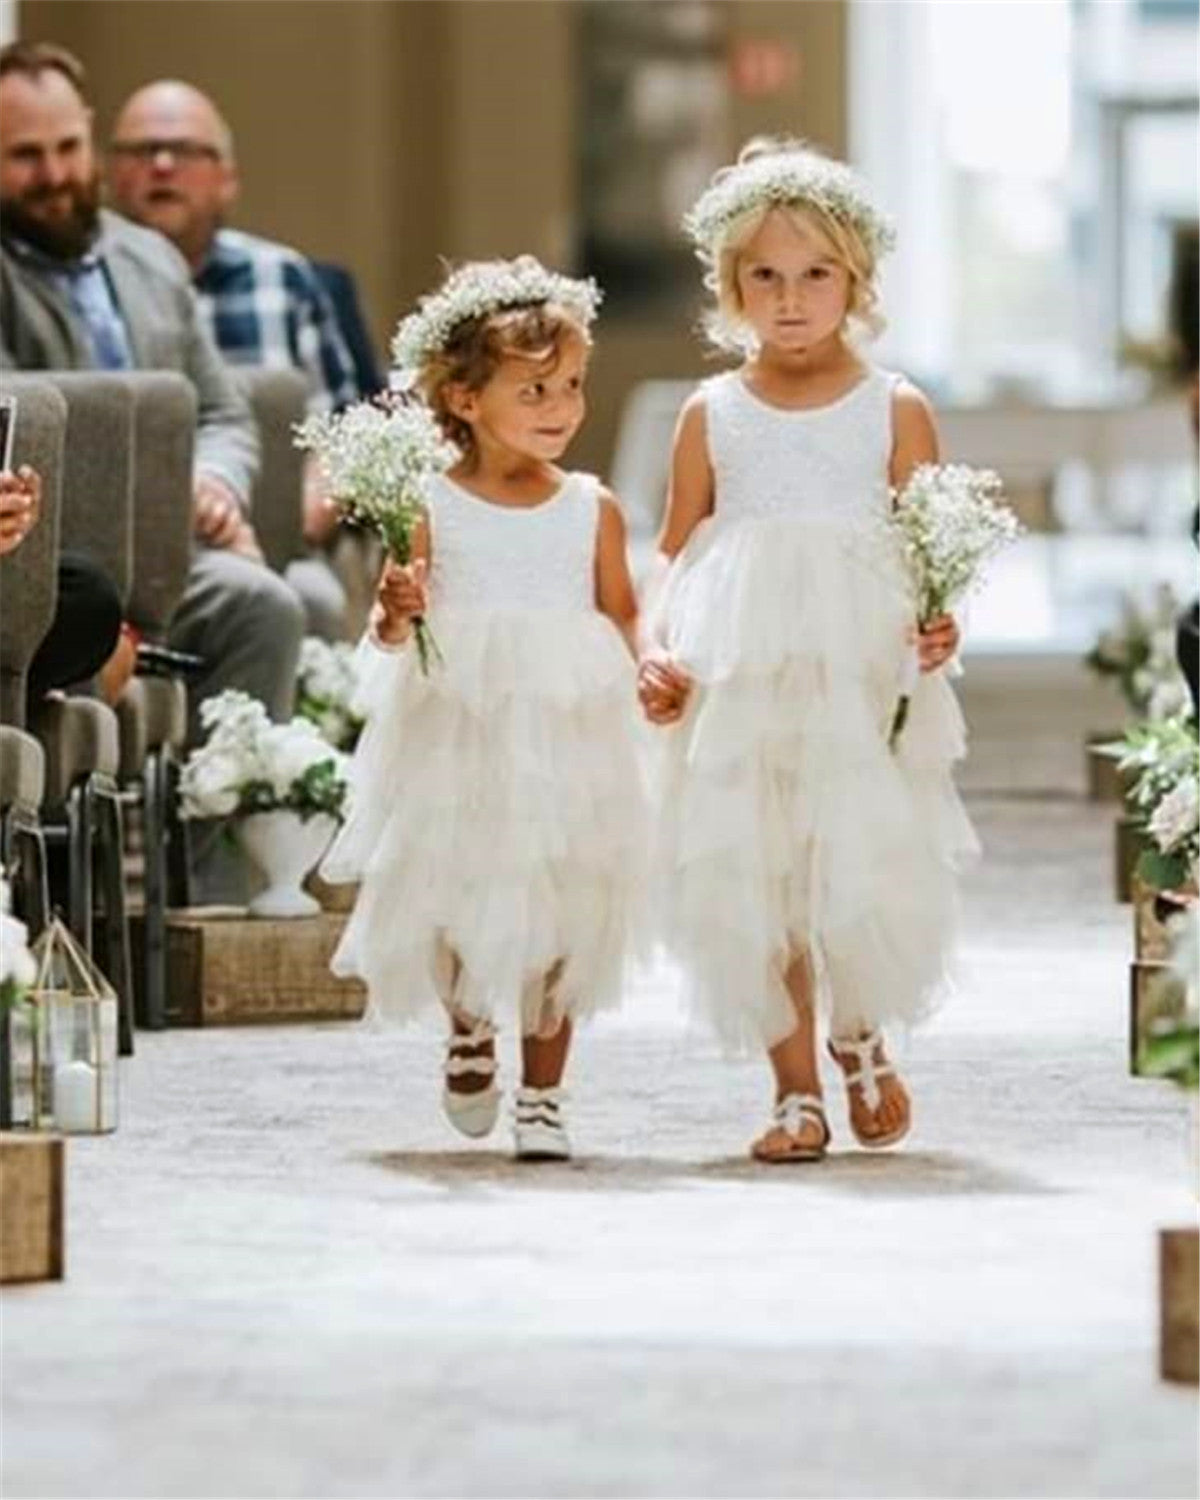 2Bunnies Flower Girl Dress Peony Lace Back A-Line Sleeveless Tiered Tulle Maxi (Ivory) - 2BUNNIES